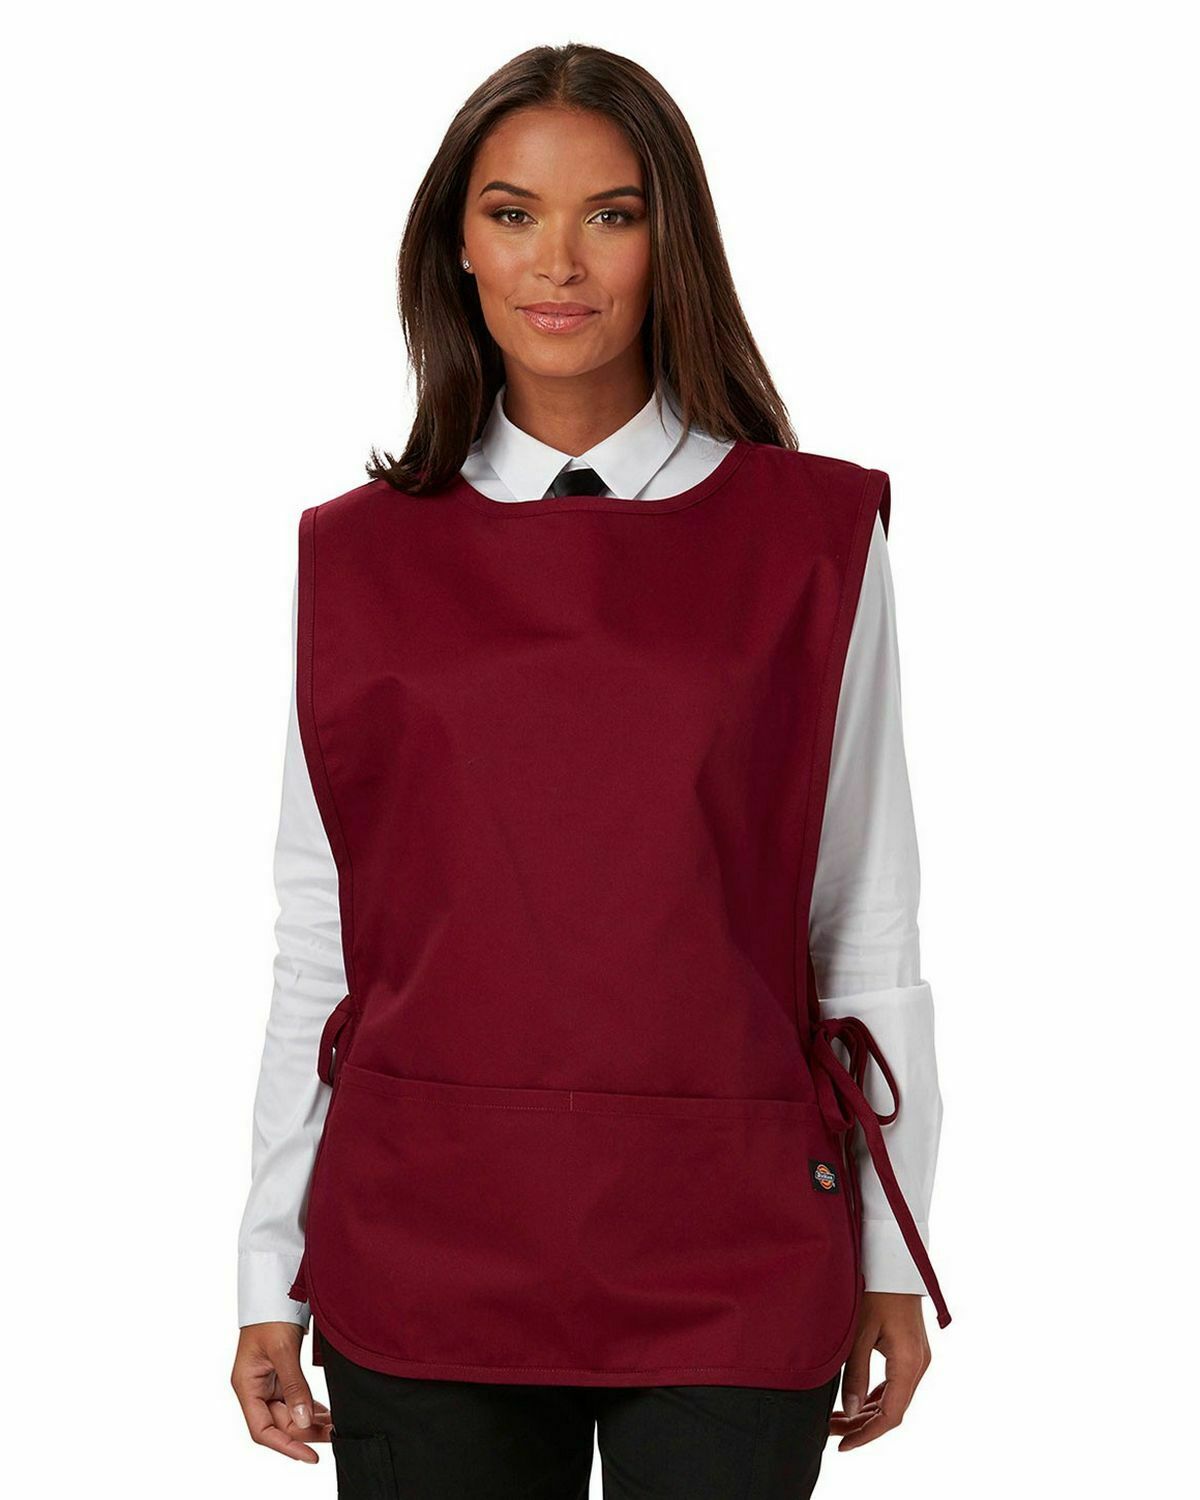 Nwt Dickies Women's Cobbler Apron Burgundy Dc50 One Size